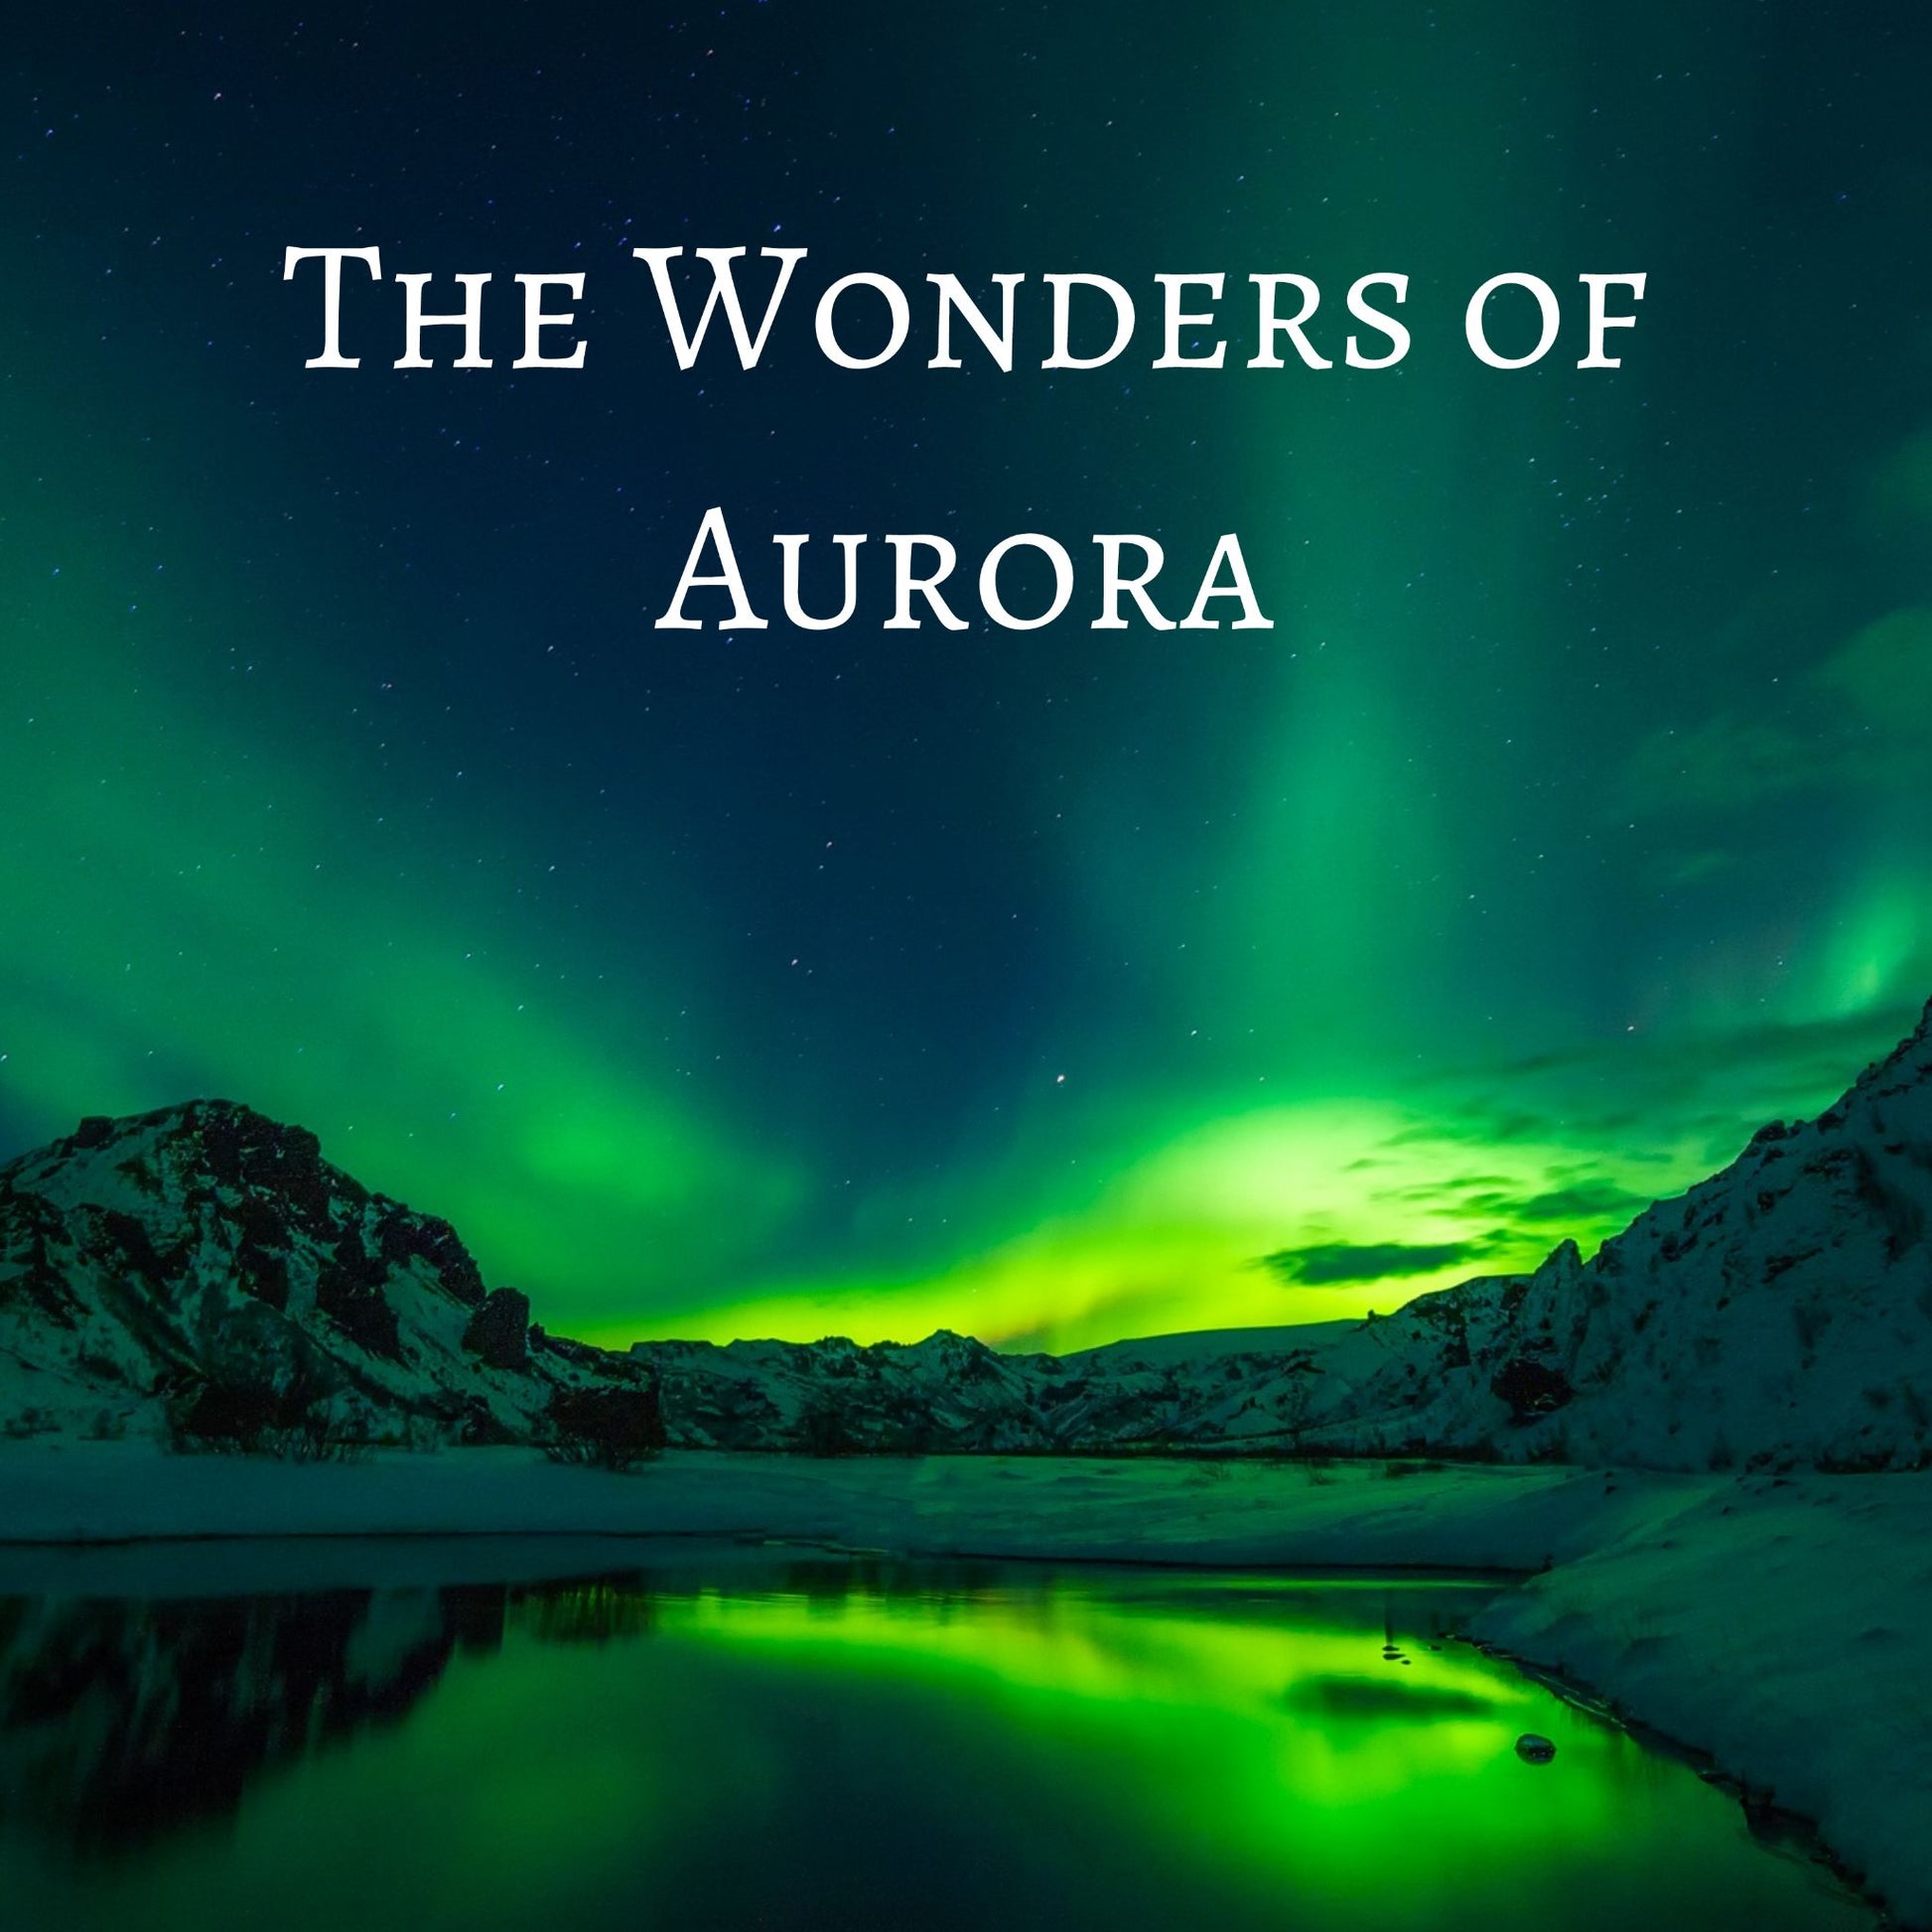 CD Cover of song The Wonders of Aurora